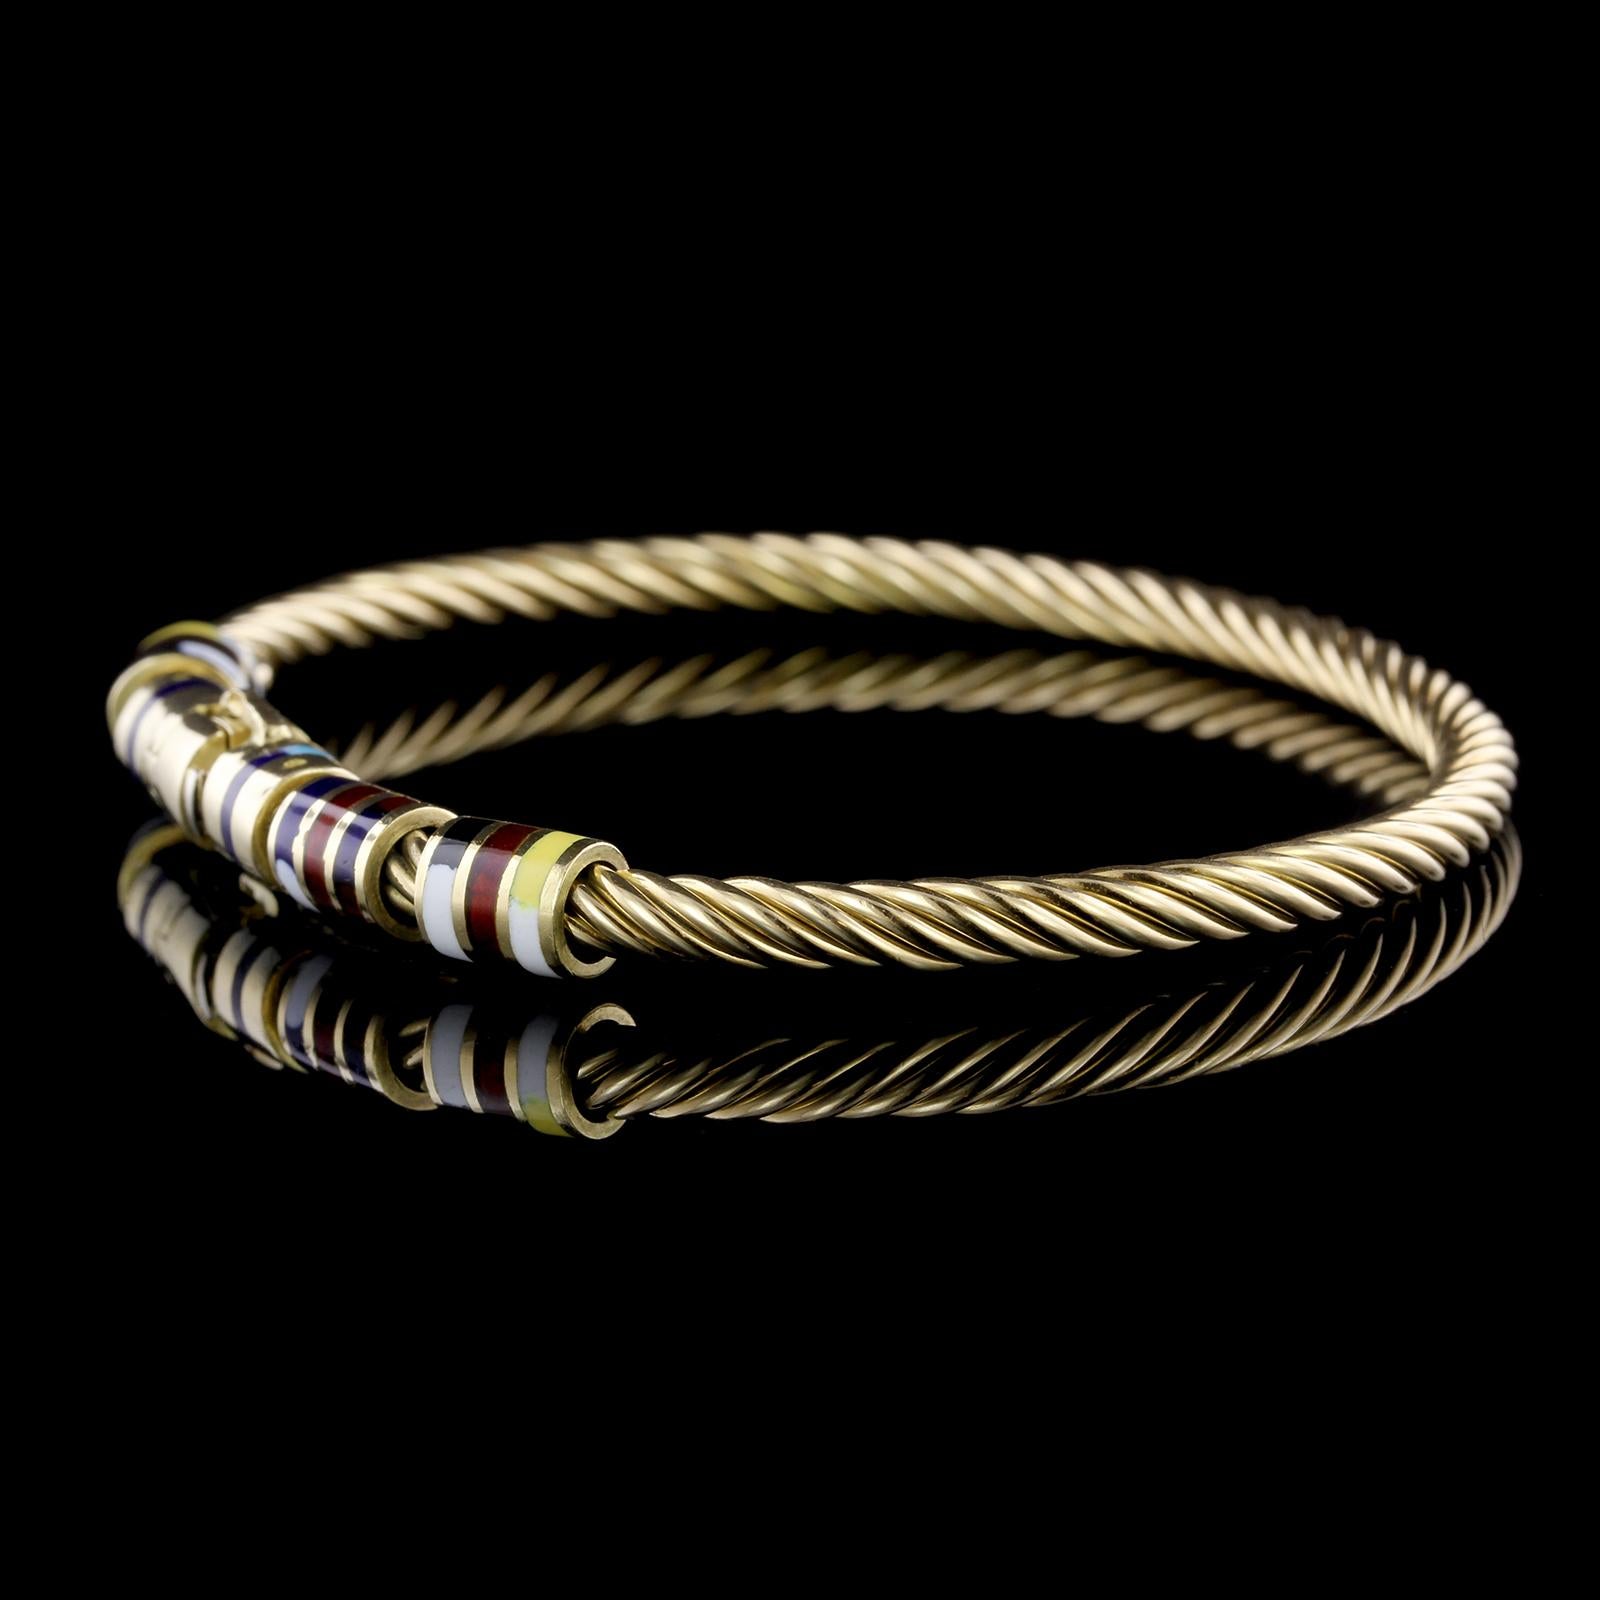 Giovepluvio 18K Yellow Gold Enamel Nautical Bangle. The bracelet is designed
as a ropetwist bangle with various colored enamel rondelle accents, interior
circumference 7 1/4